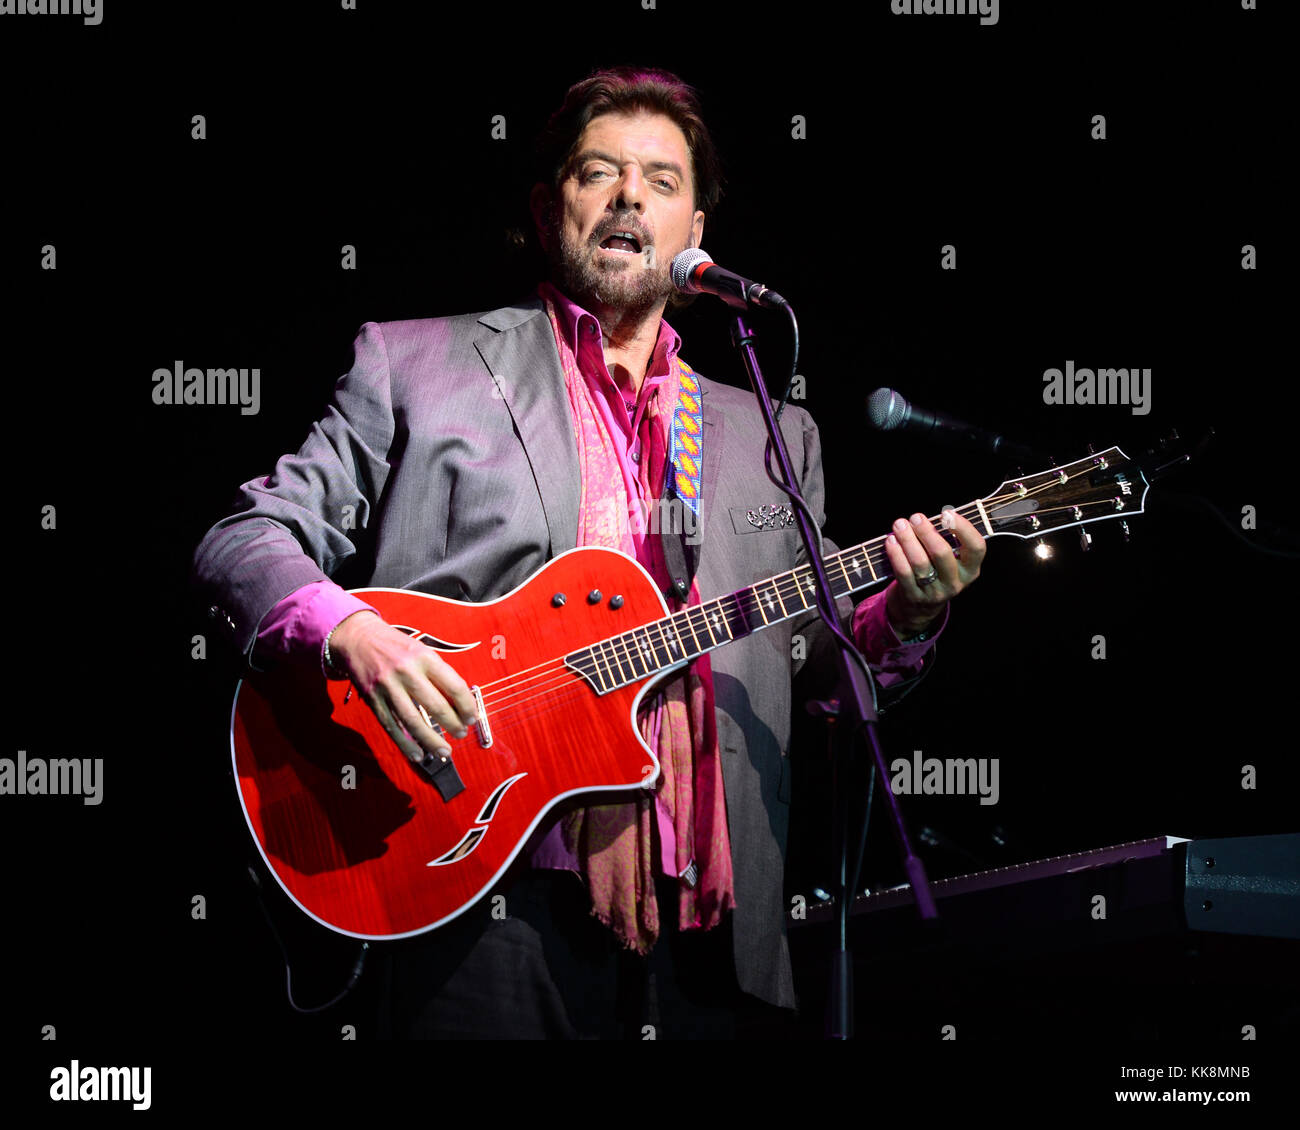 BOCA RATON, FL - FEBRUARY 14: Alan Parsons of The Alan Parsons Project performs at the Mizner Park Amphitheatre on February 14, 2016 in Boca Raton, Florida   People:  Alan Parsons Stock Photo